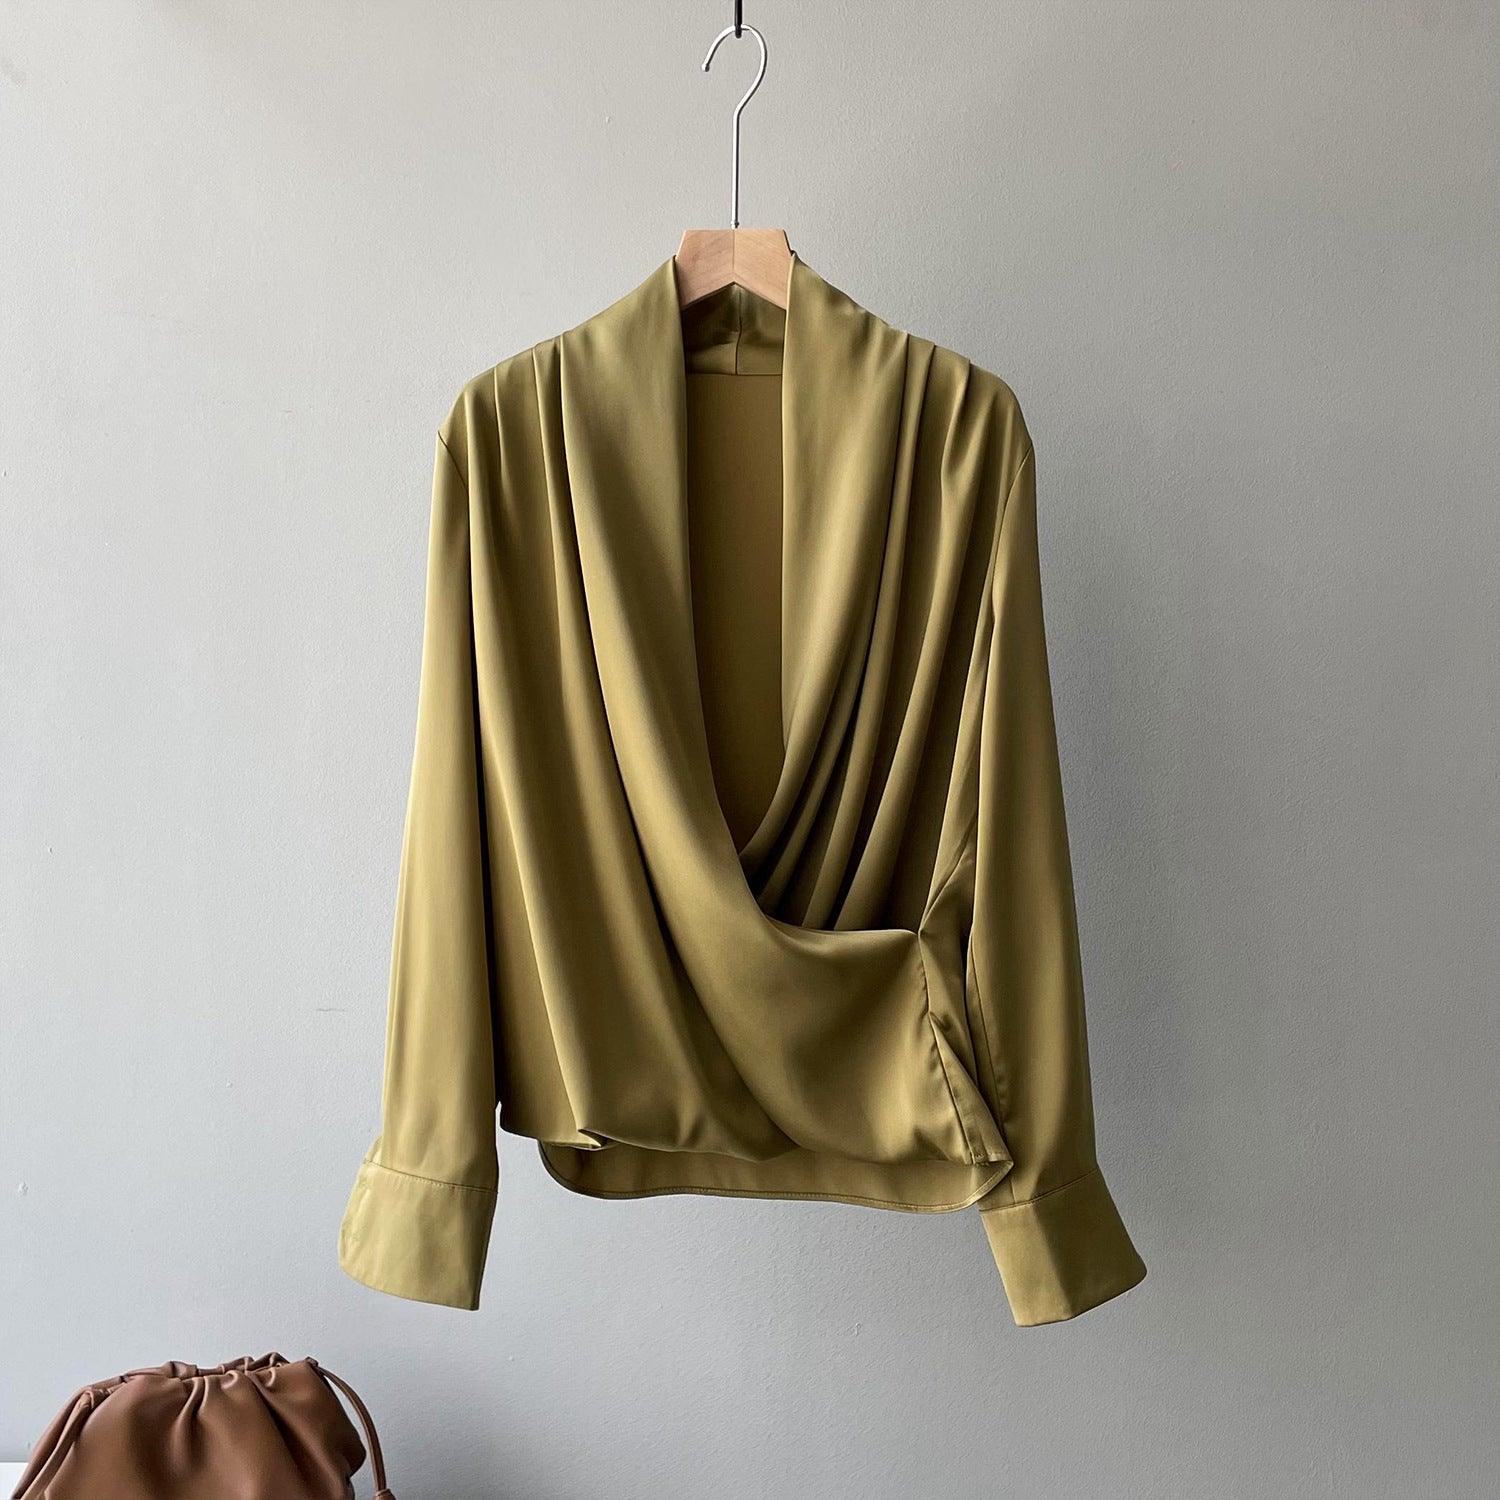 Timeless V-neck Satin Woven Blouse, Silk Satin Long Sleeves Shirt, Women Smart Casual Silky Top, Green Sleeve Blouse, Any Occassion, Gift - Alexel Crafts